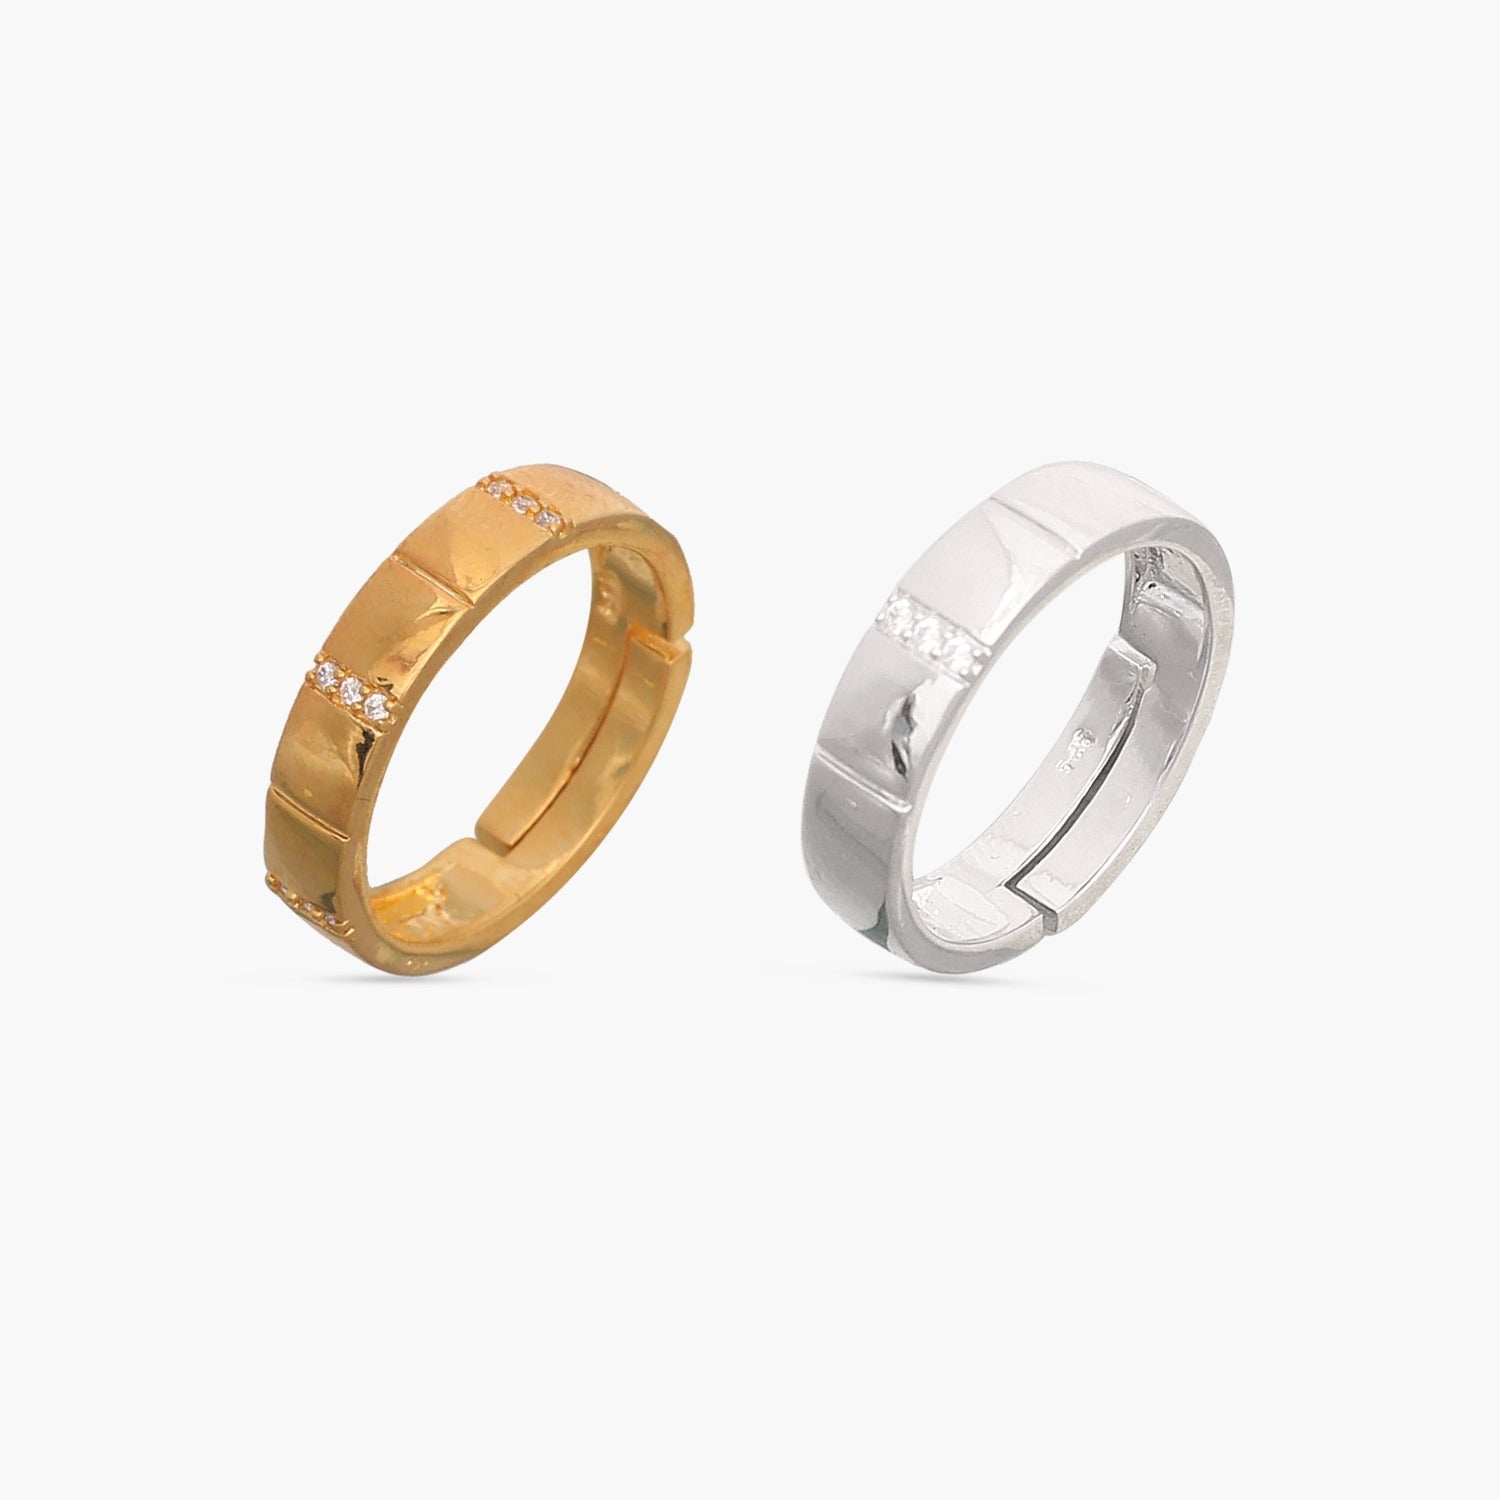 Buy Gold-Toned Rings for Men by Giva Online | Ajio.com